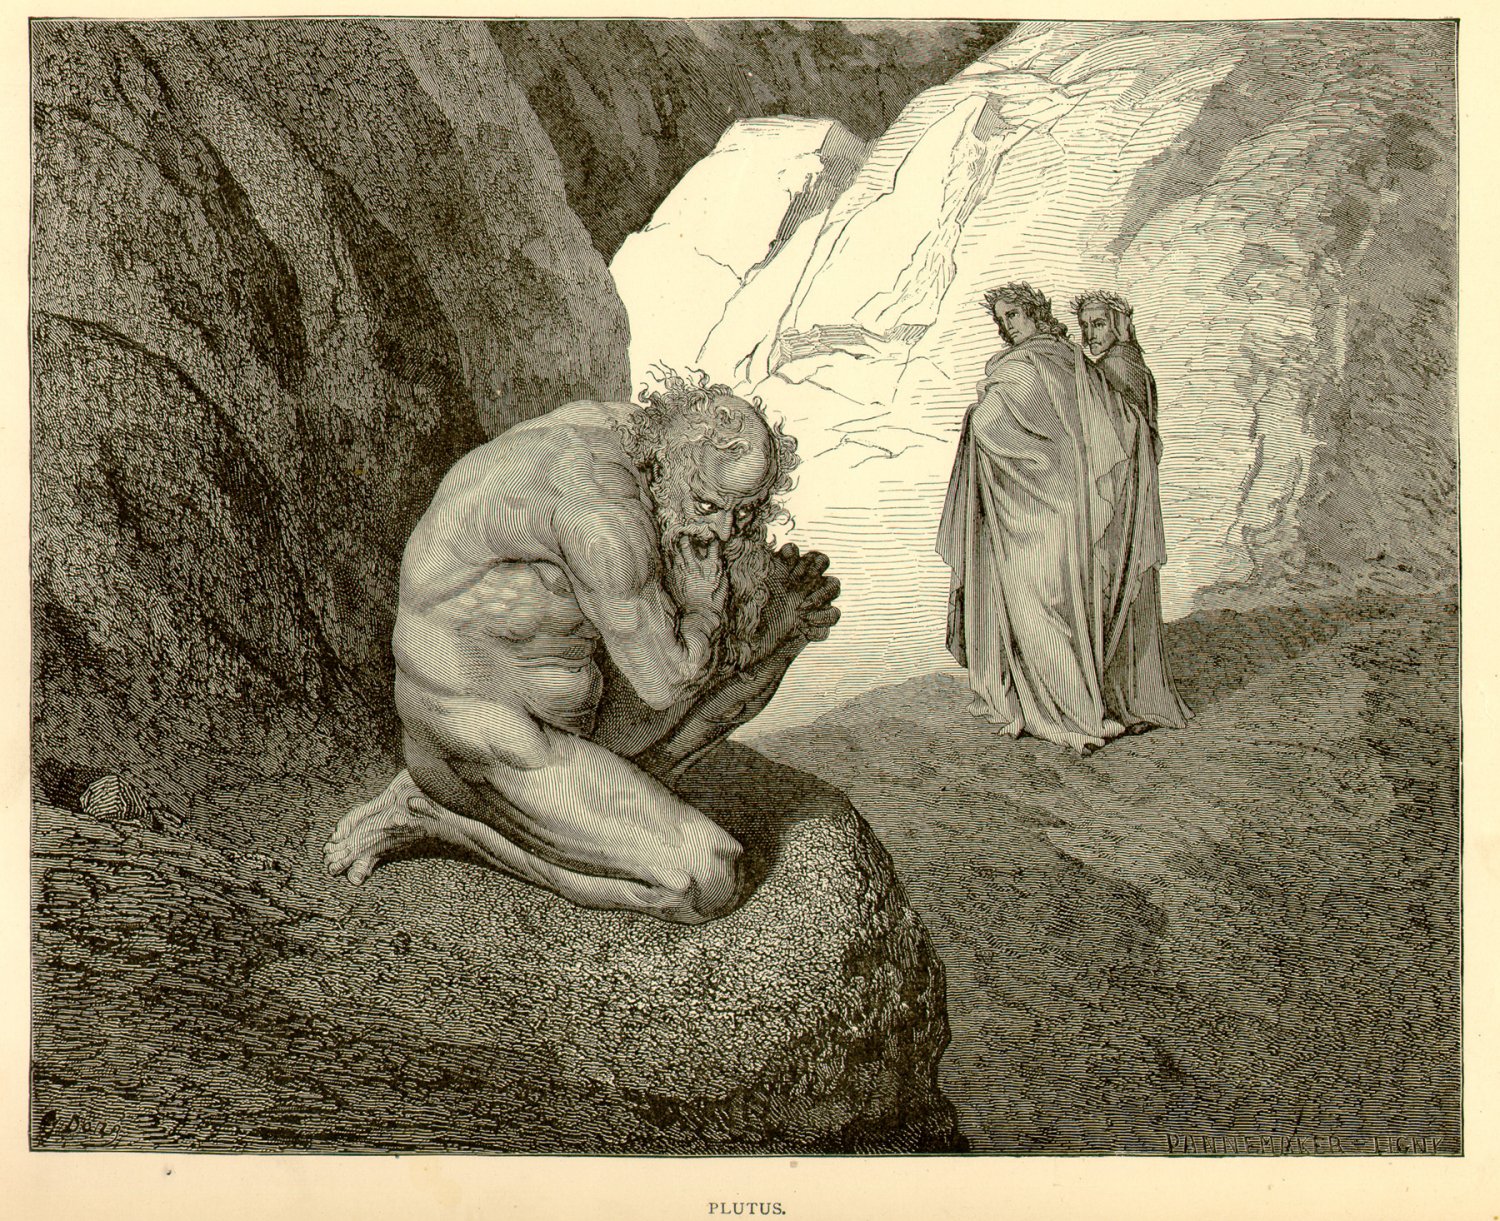 Plutus, Gustave Dore, 126 year old antique engraving